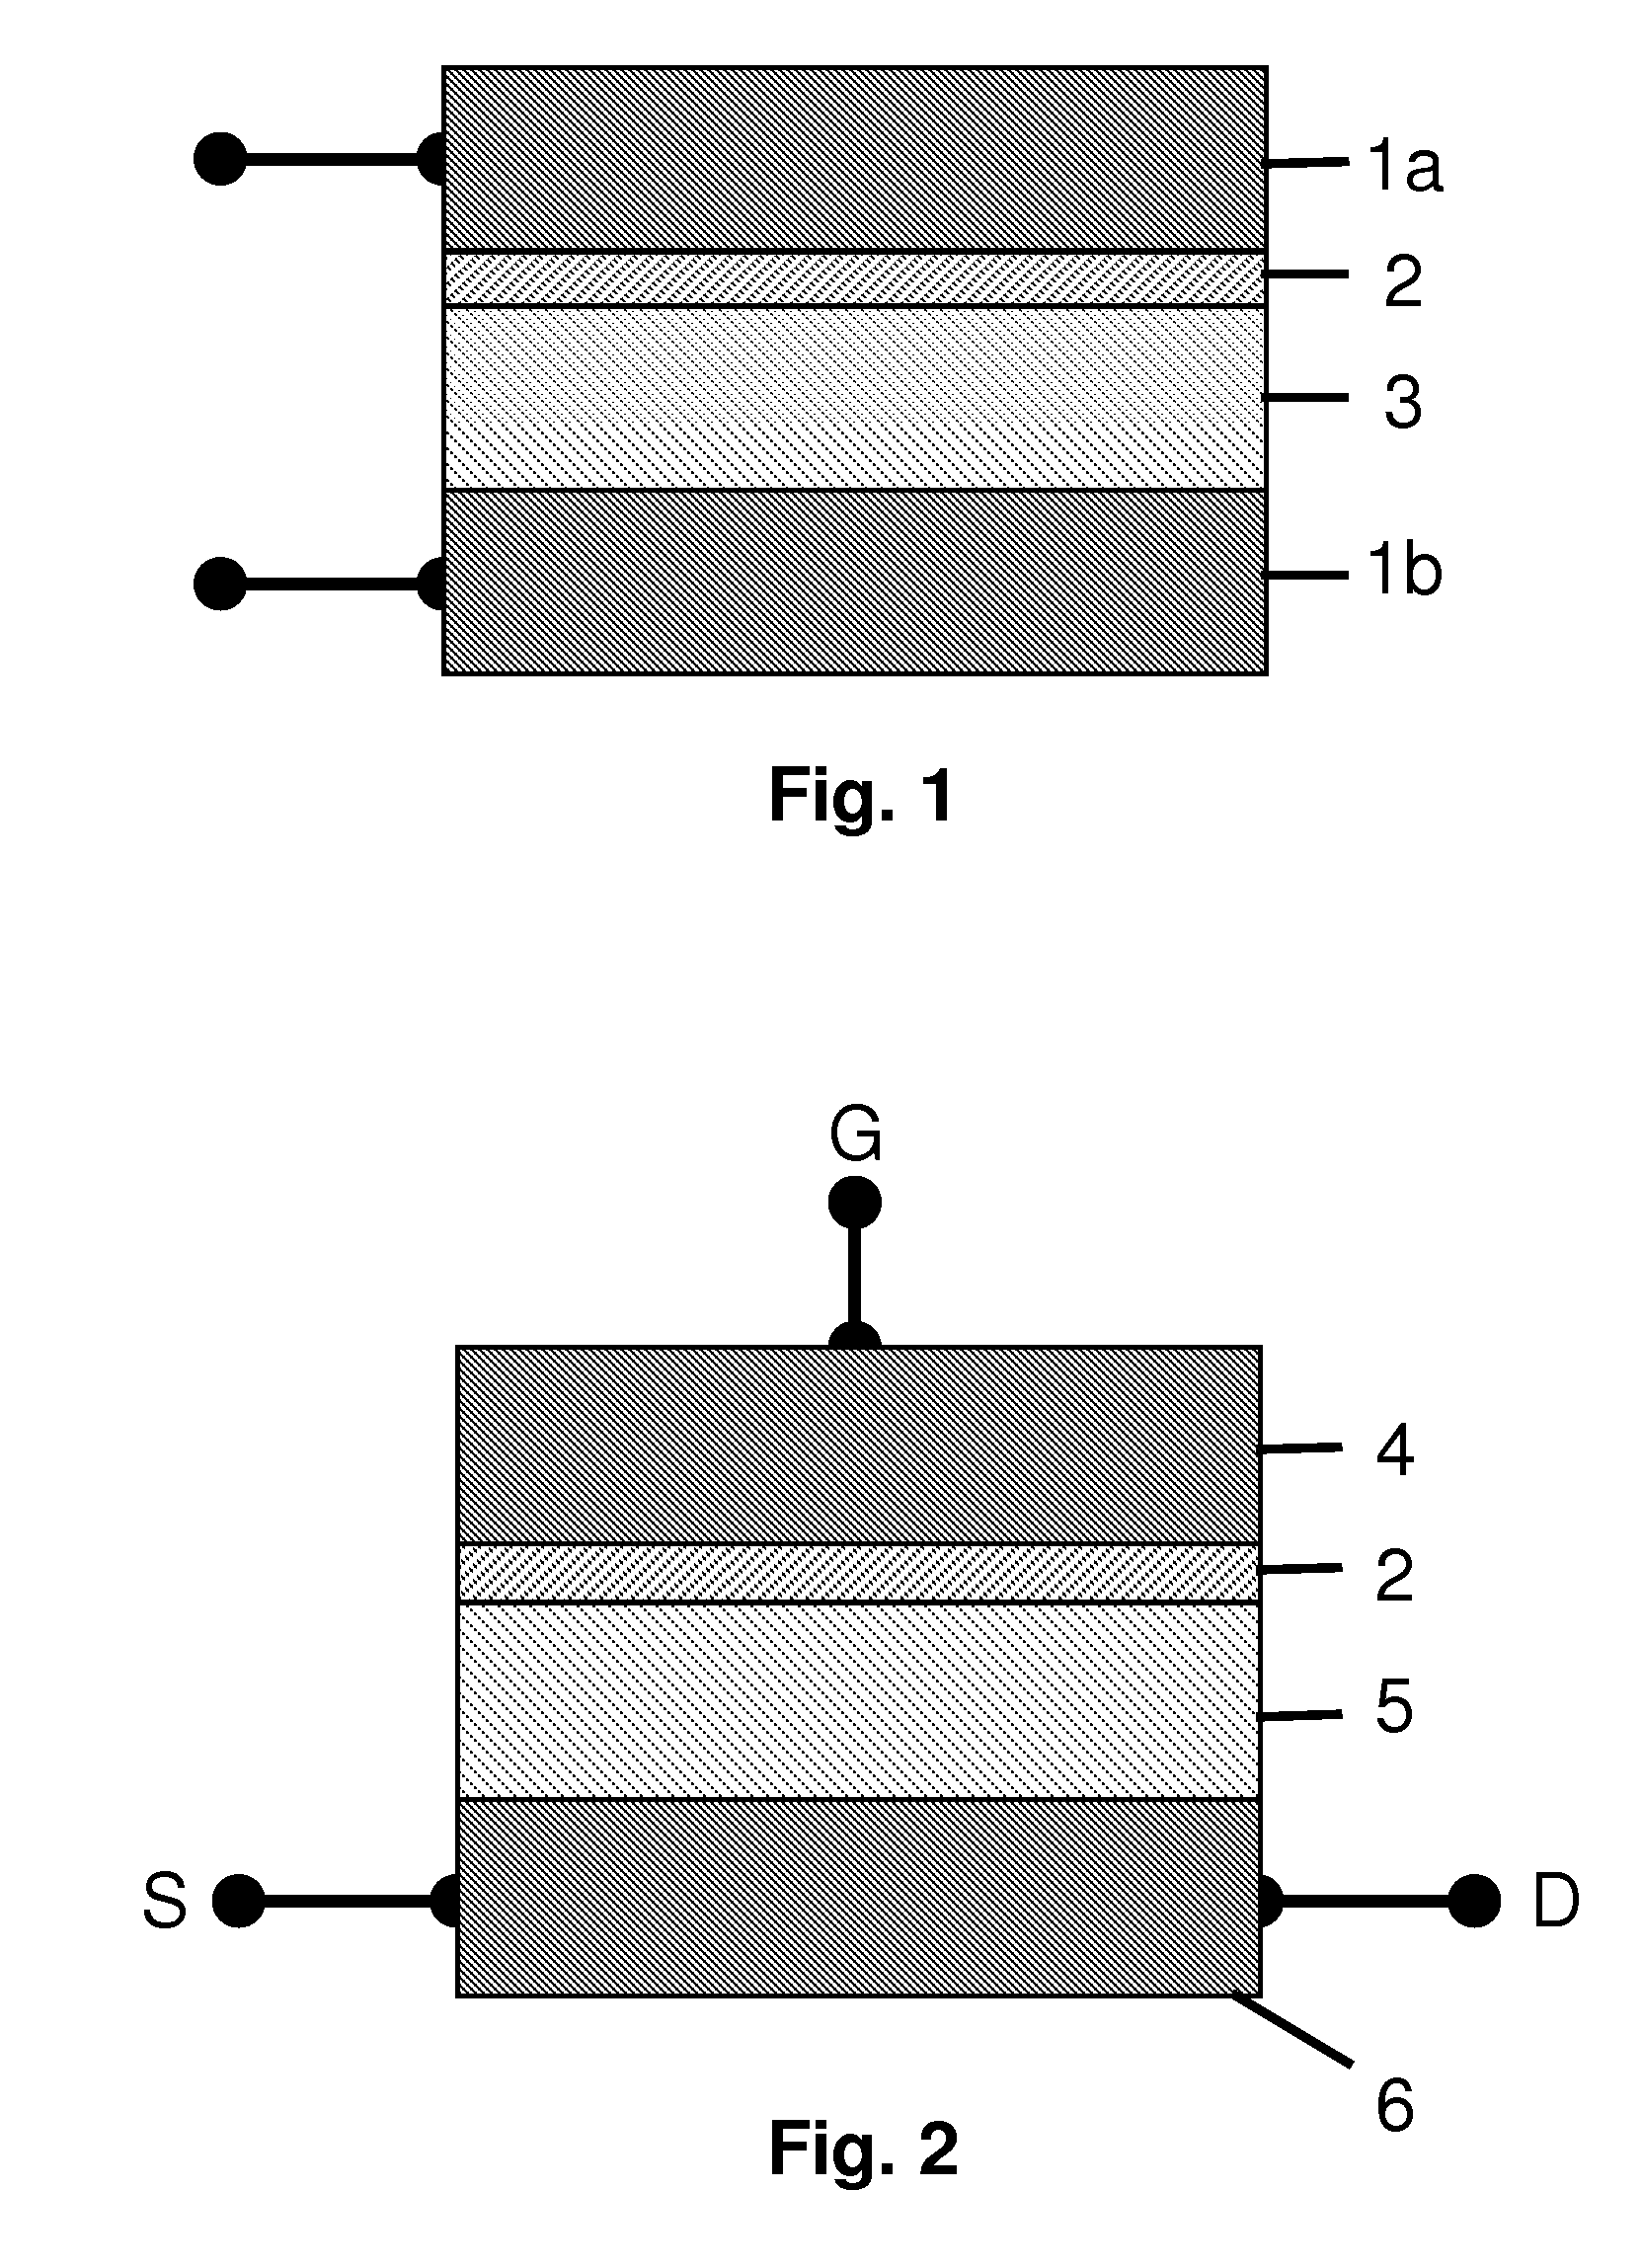 Novel capacitors and capacitor-like devices